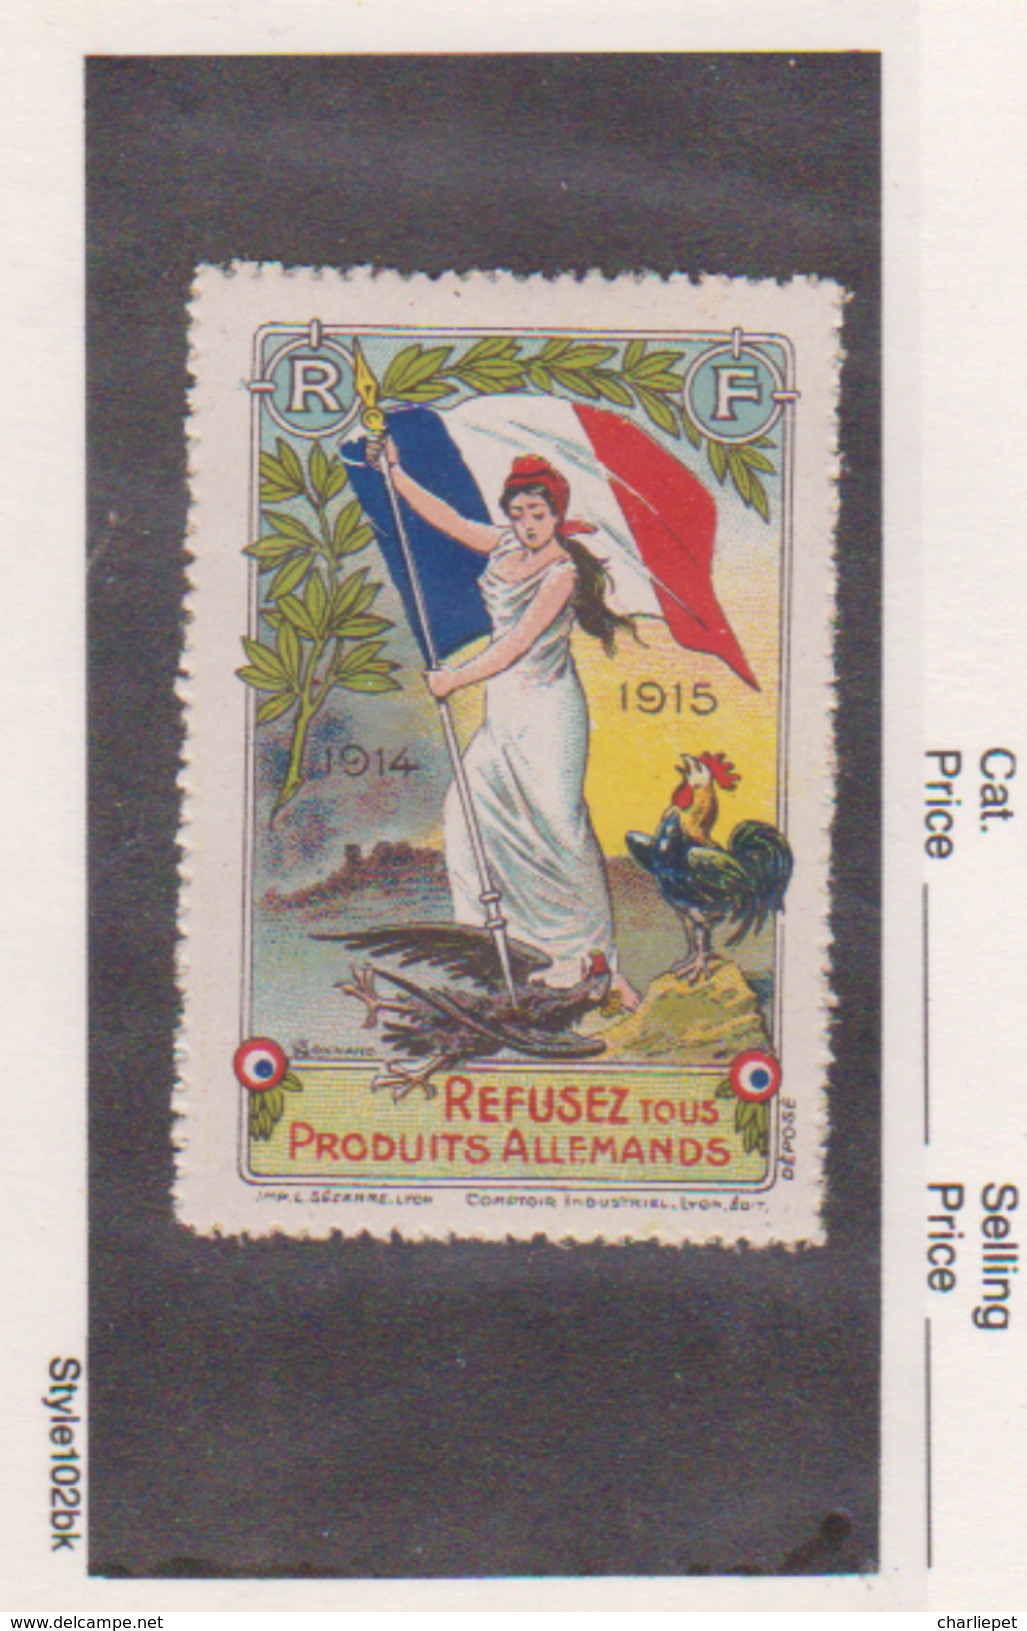 France WWI Refusez Tous Produits Allemands Vignette  Military Heritage Poster Stamp - Military Heritage